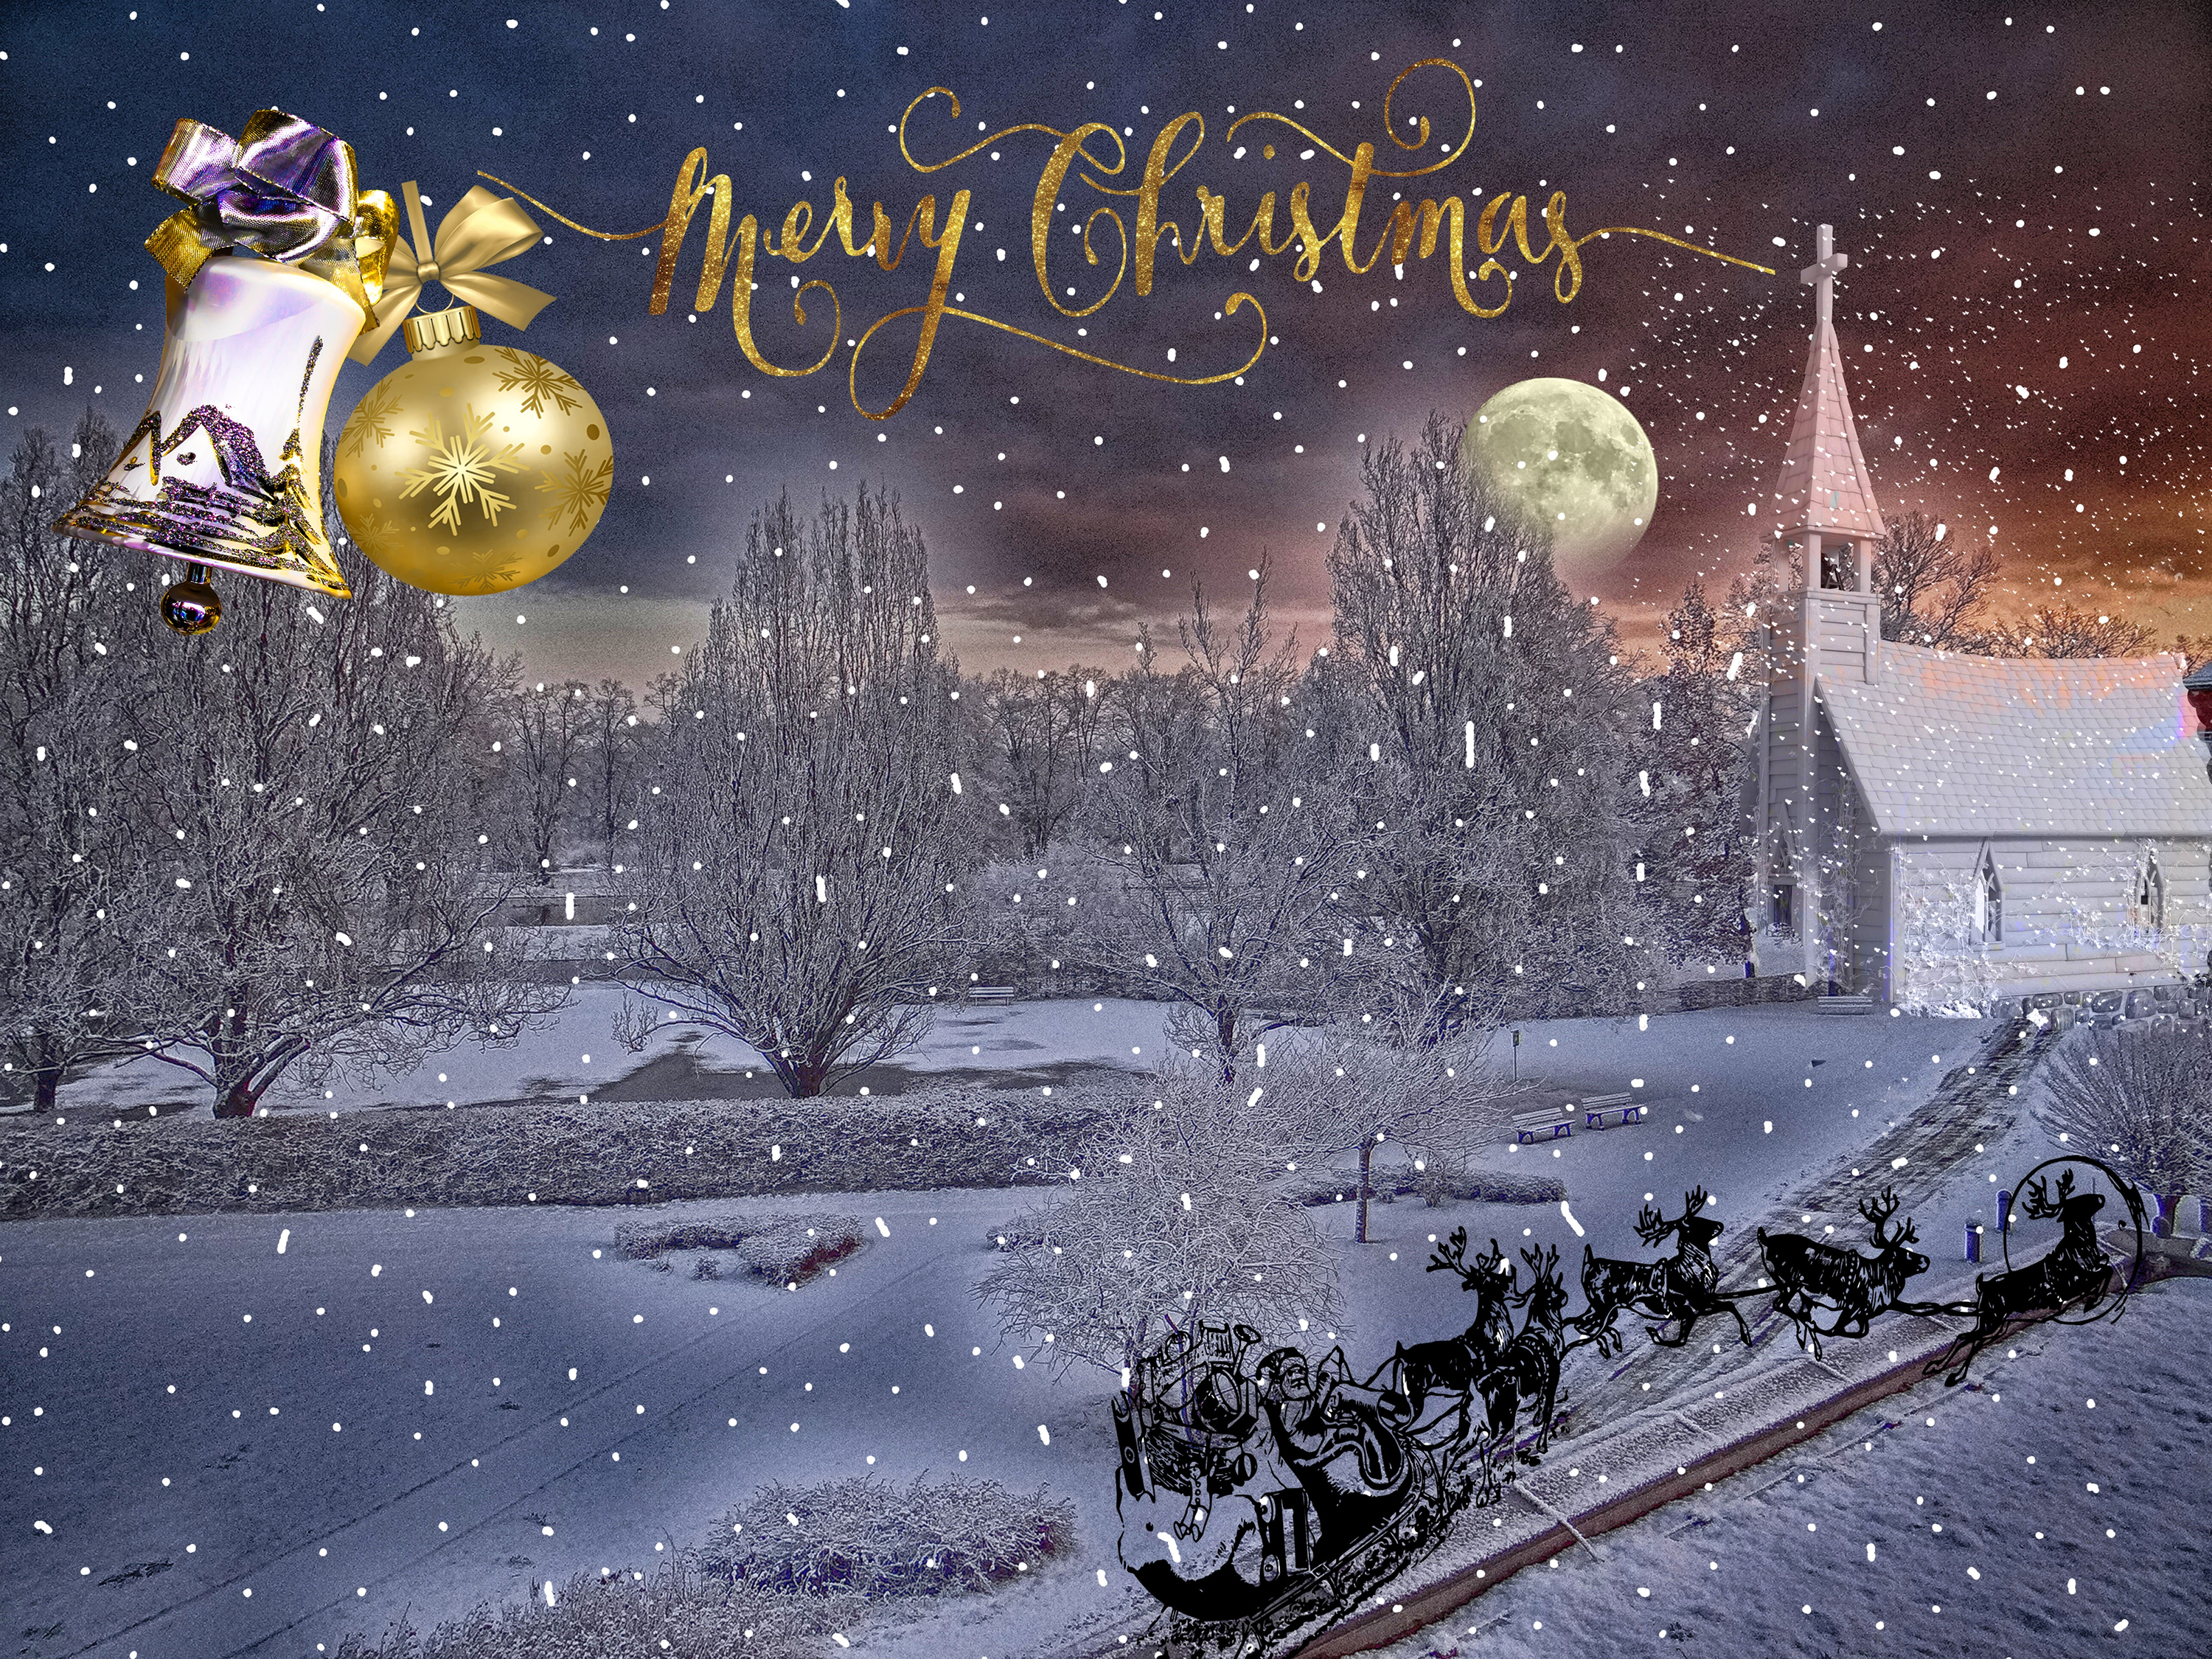 moon, merry christmas, holiday, christmas, bauble, bell, church, reindeer, sled, snow, winter